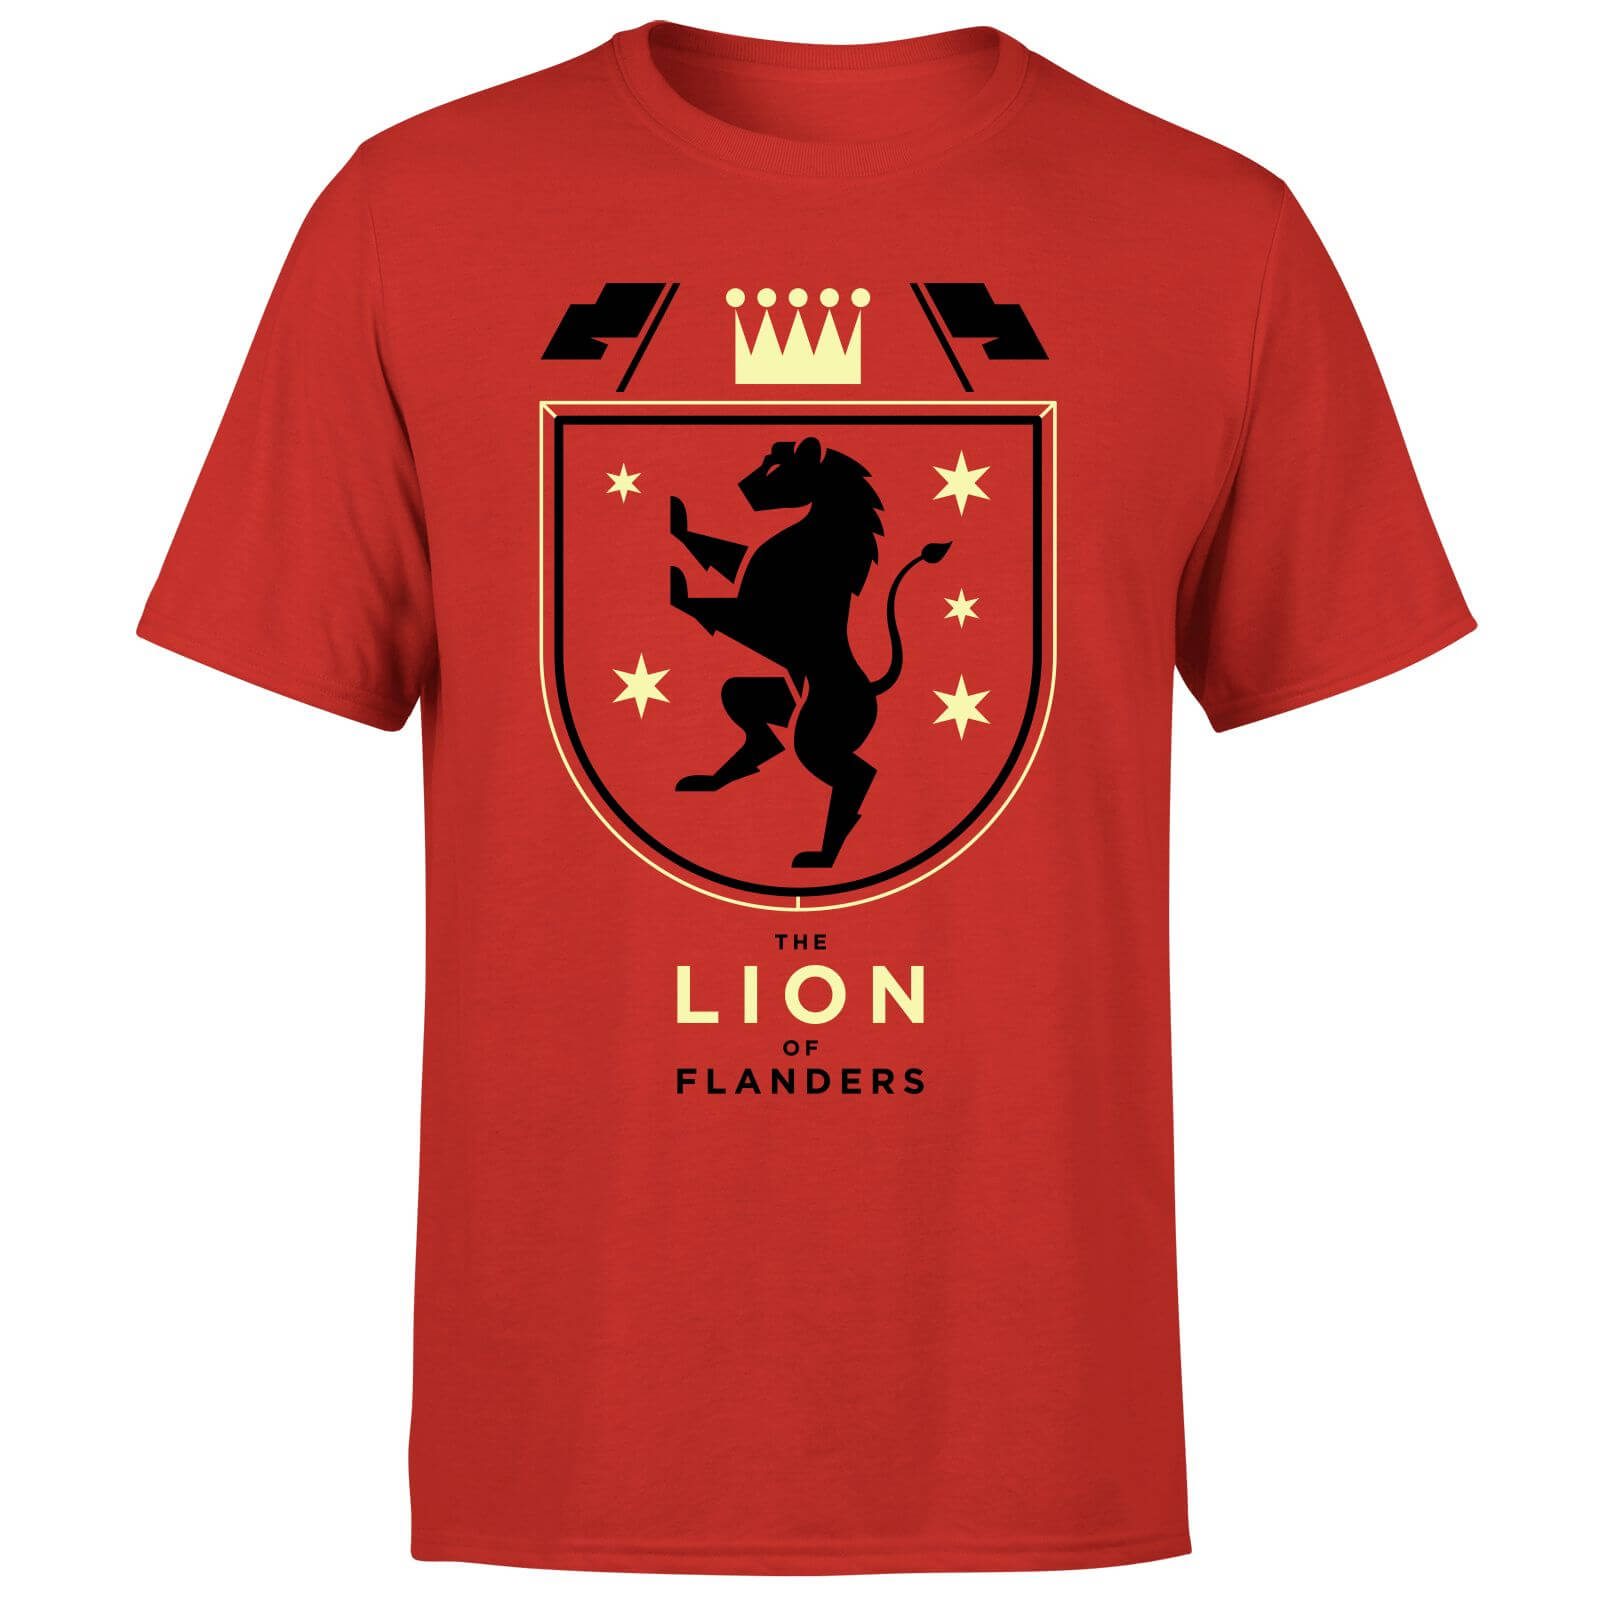 The Lion Of Flanders Men's T-Shirt - XXL - Red